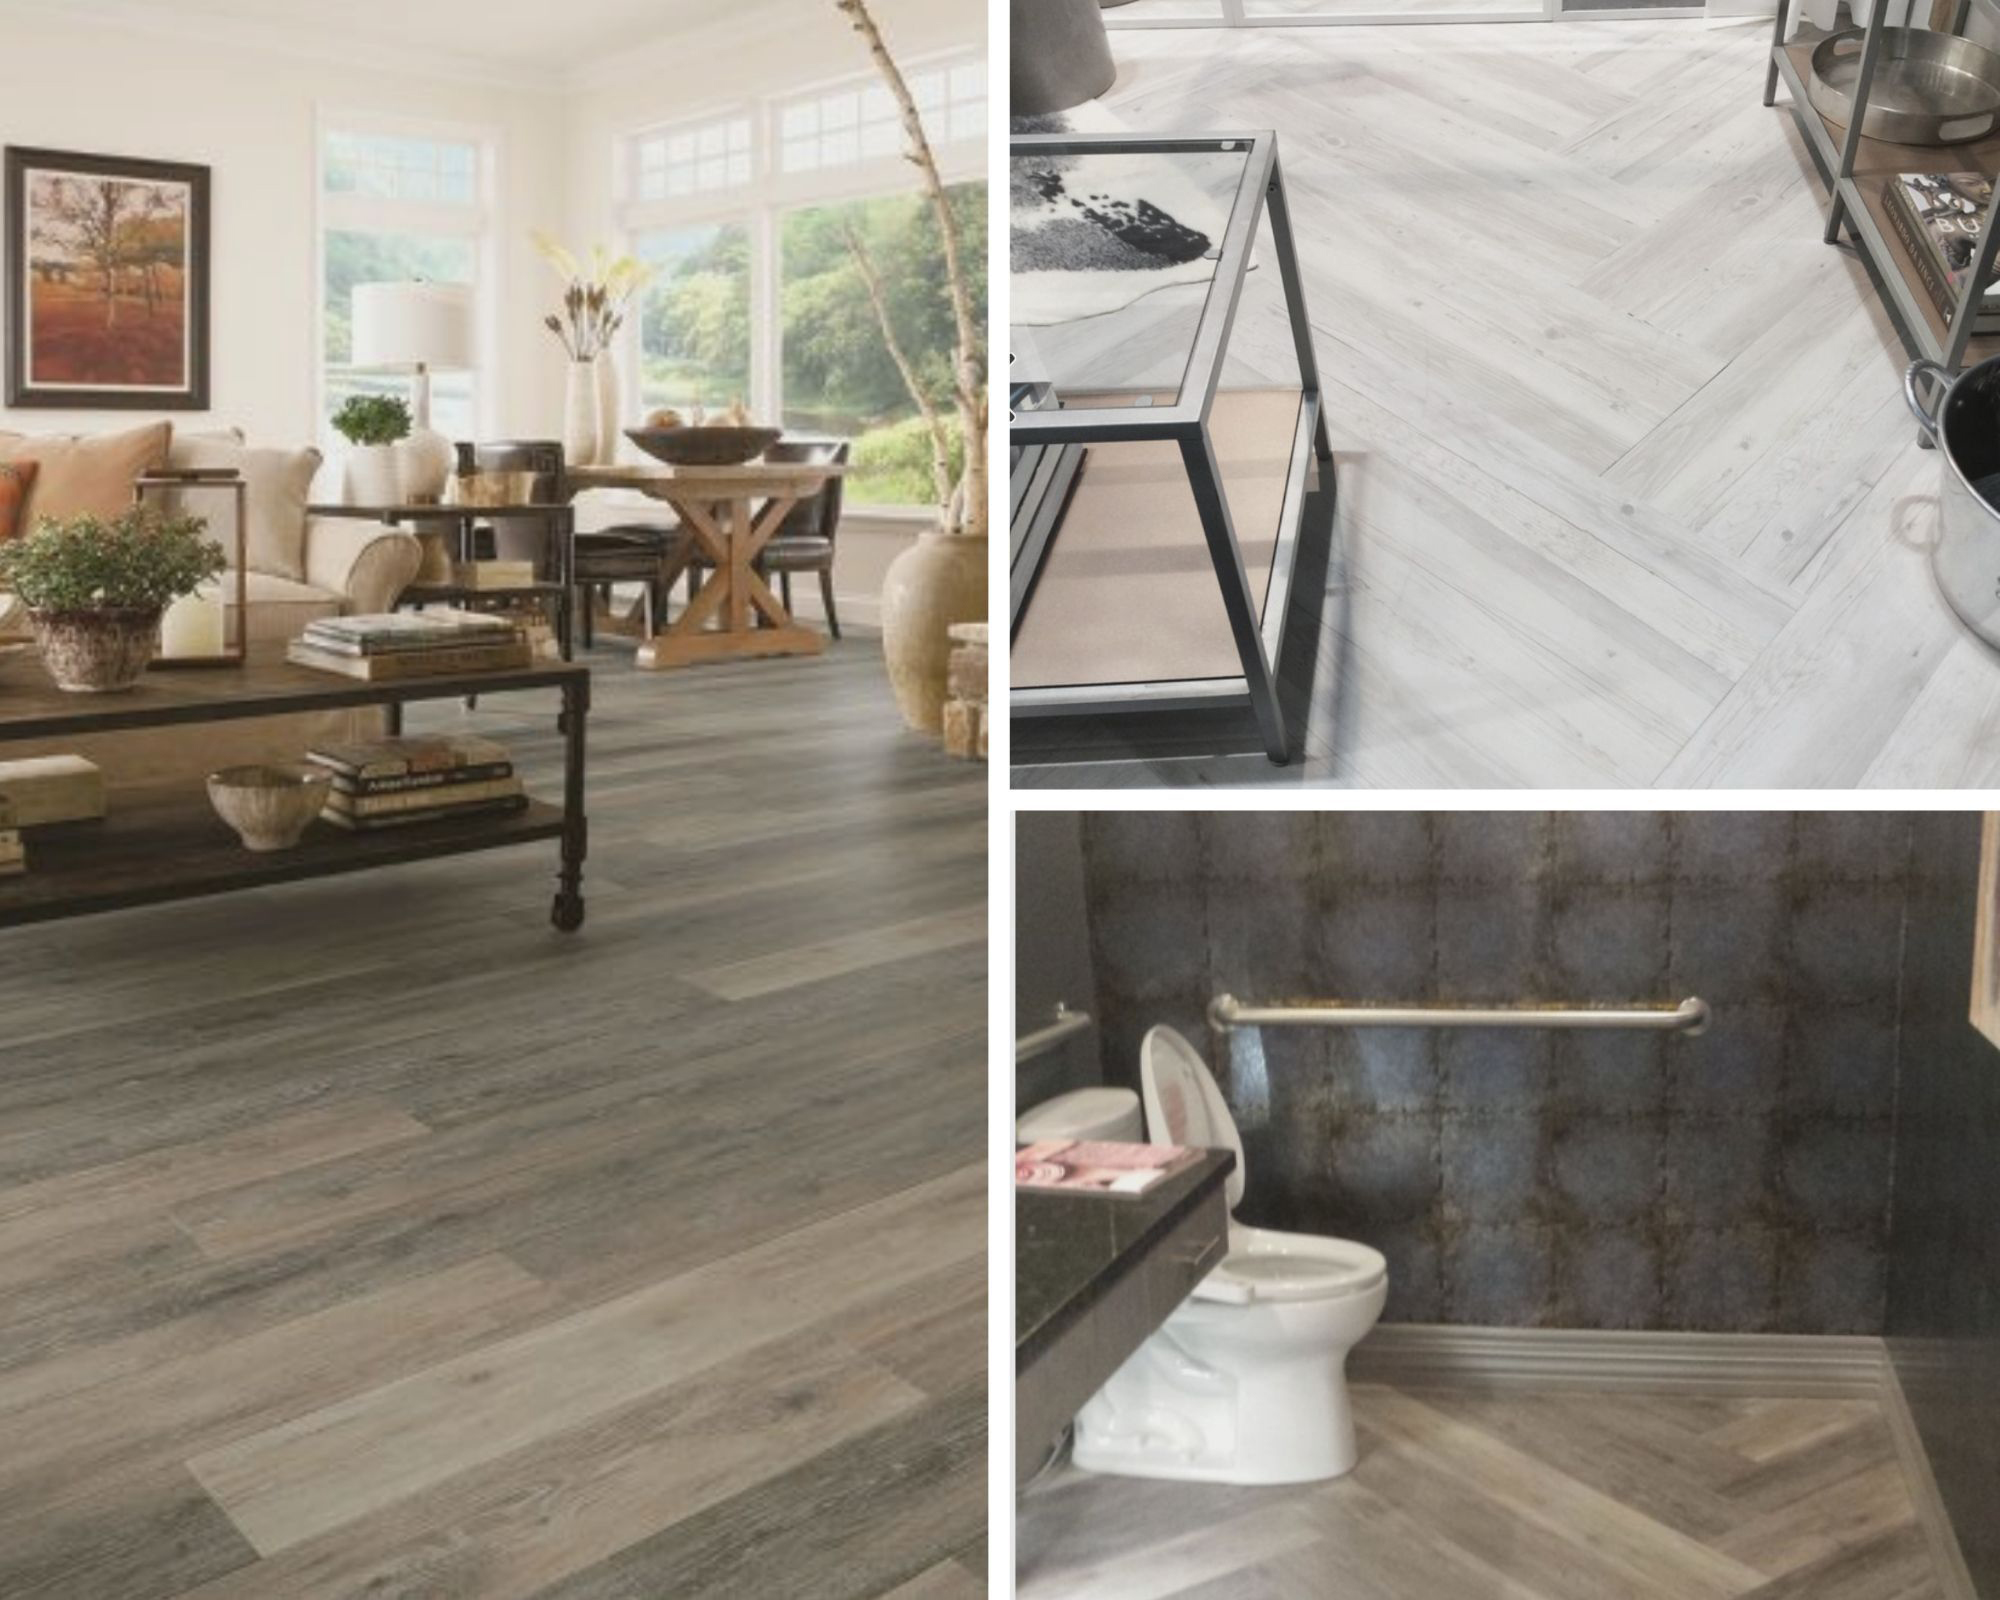 Plank Looks In Durable Luxury Vinyl Tile, Which Is More Expensive Laminate Or Vinyl Plank Flooring